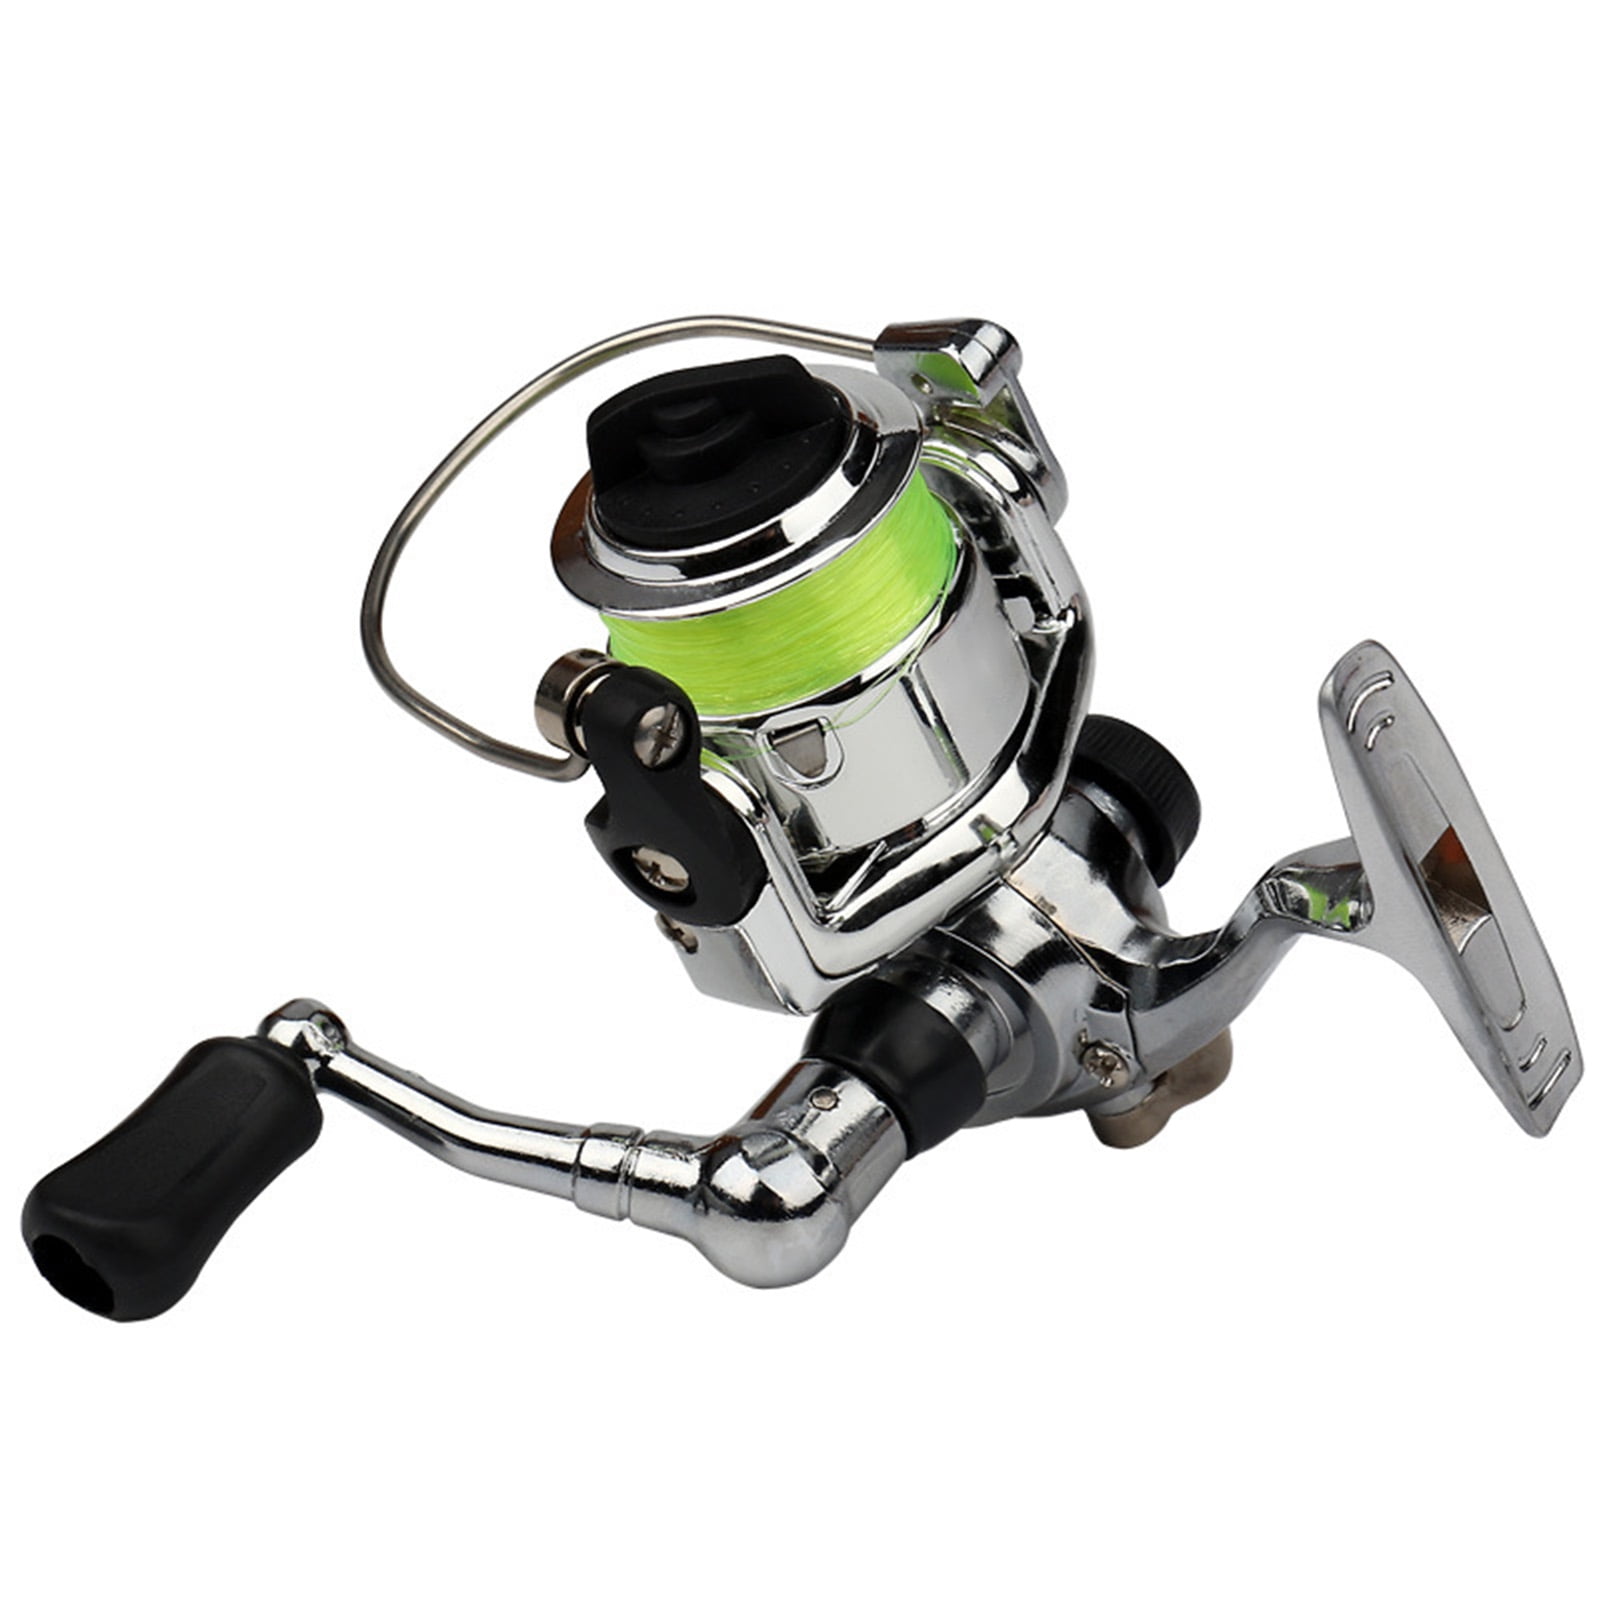 SPRING PARK Portable Ultra Small Mini Stainless Steel Elastic Fishing Rod  and Spinning Wheel Reel Combos, Aluminum Alloy Handle Fishing Pole for  River, Lake, Ice Fishing 